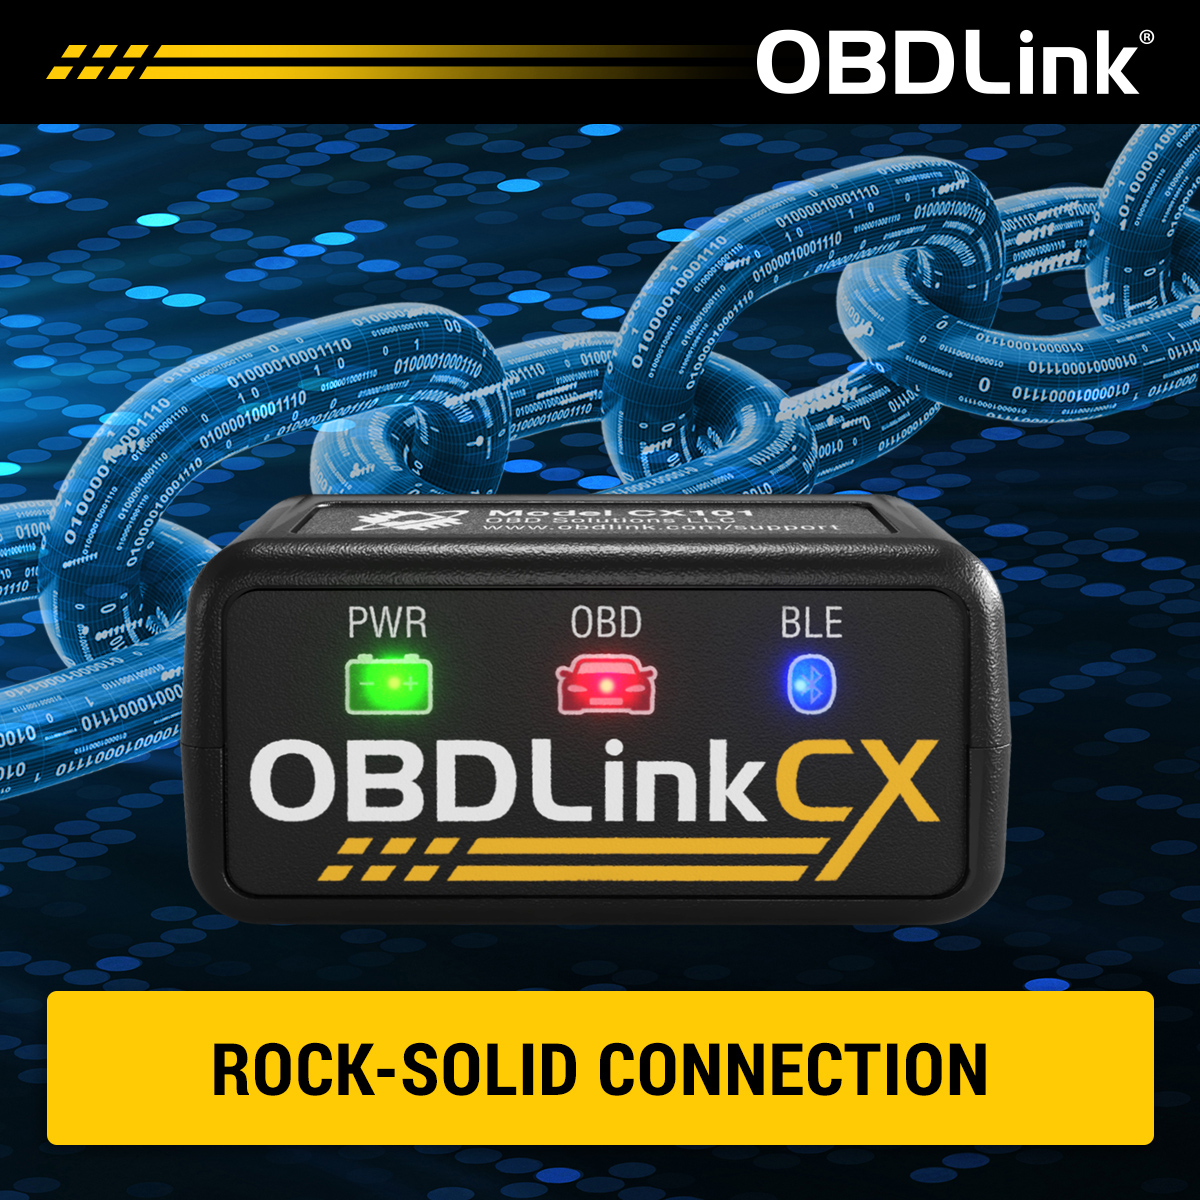 rock-solid connection